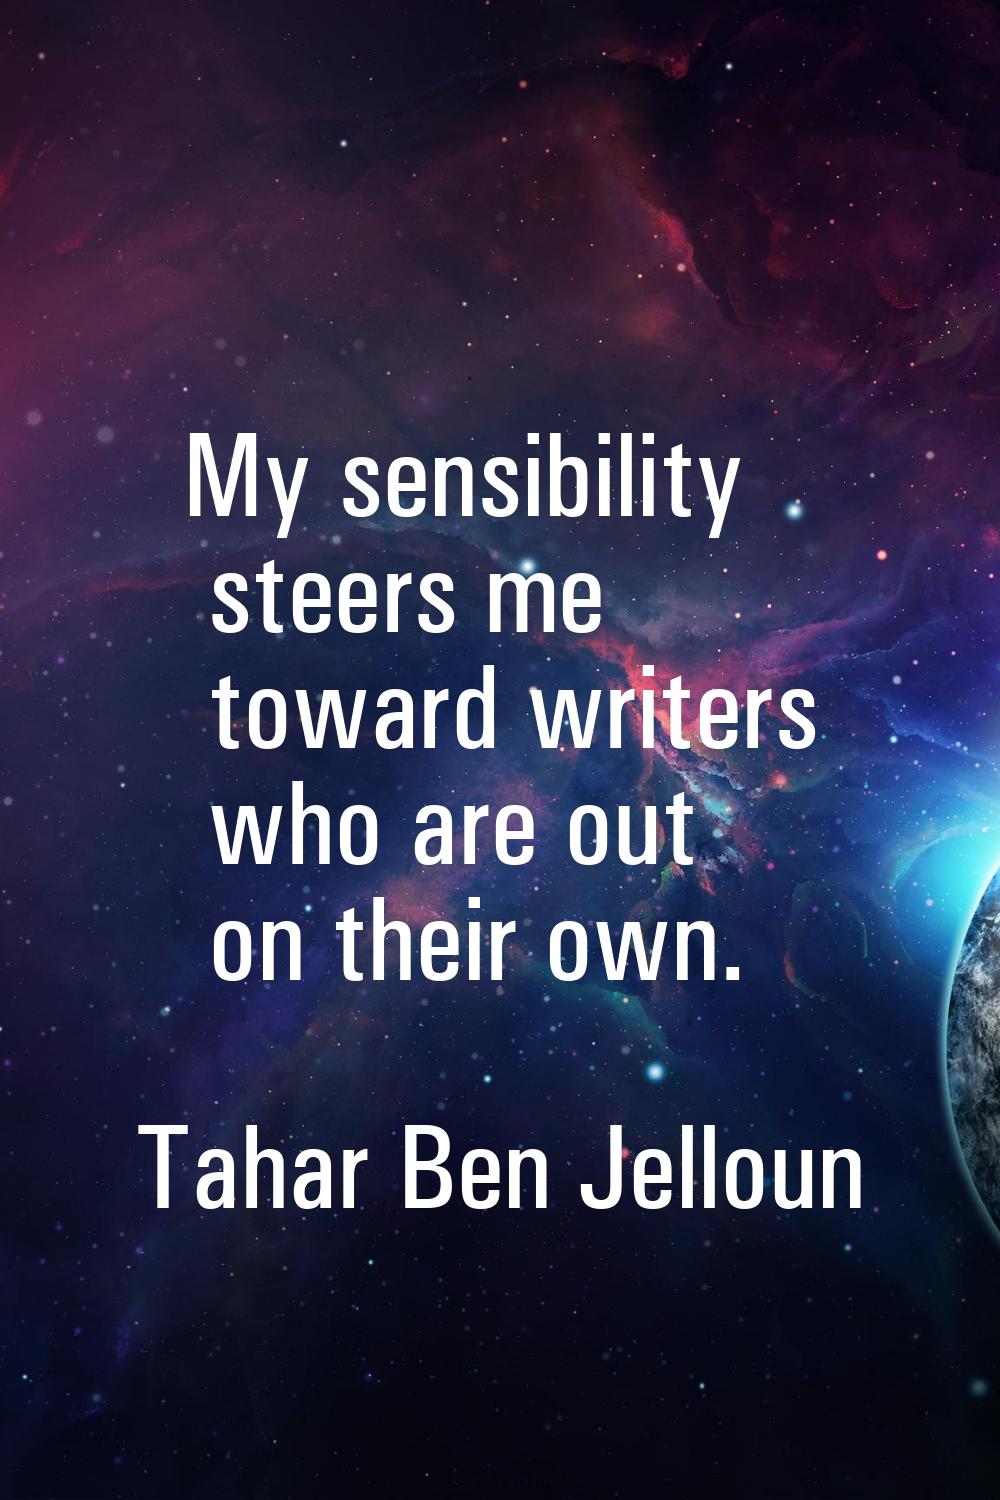 My sensibility steers me toward writers who are out on their own.